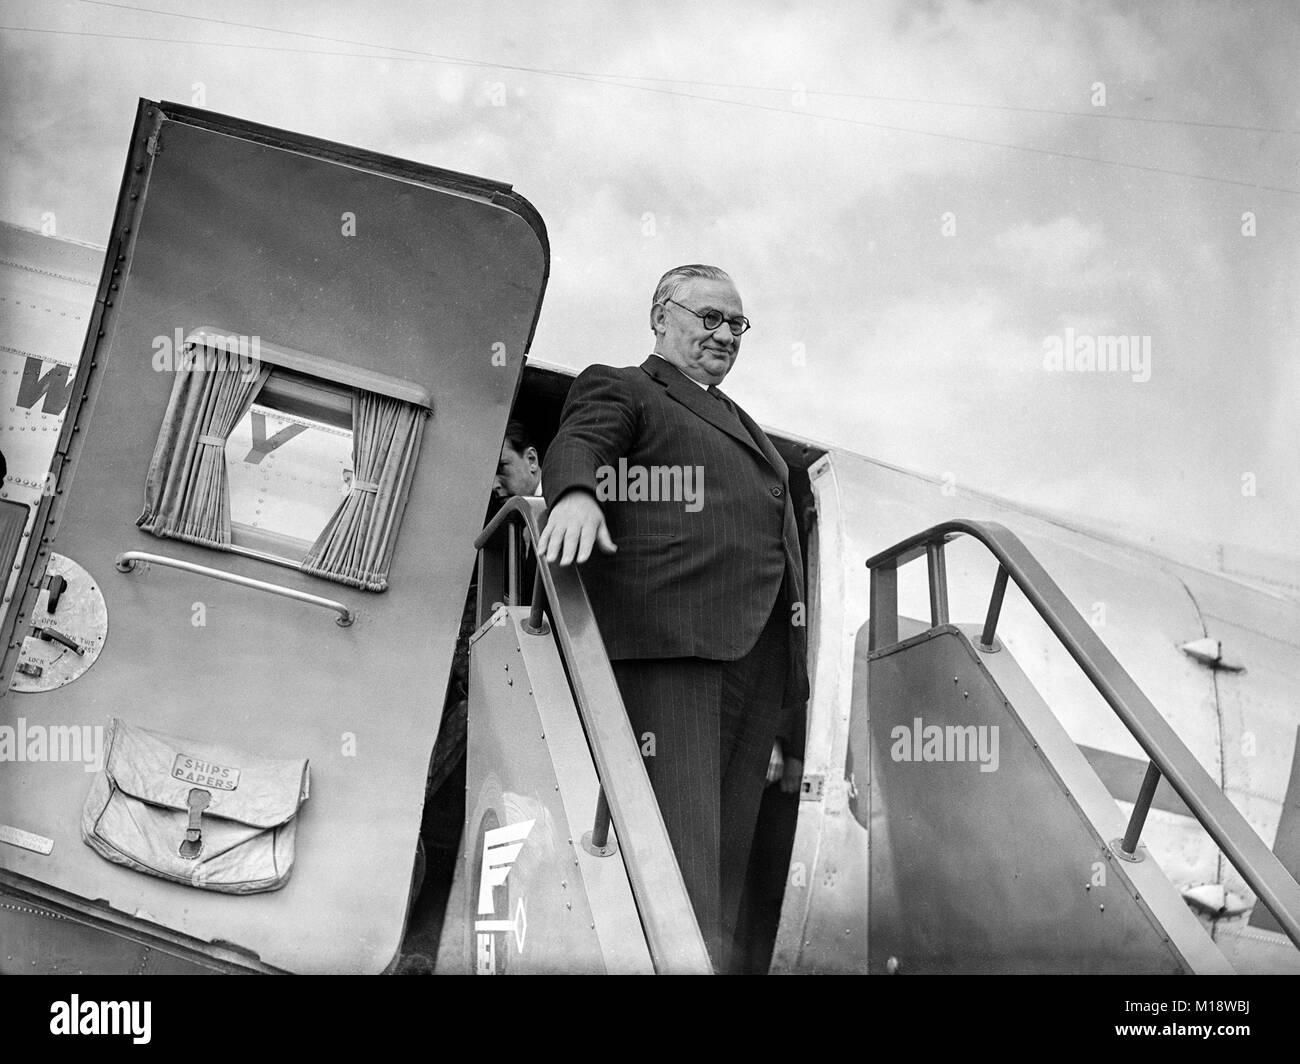 June 17th 1947. Britain's Foreign Secretary, Ernest Bevan, waves as he boards a plane at Northolt Airport in London, bound for Paris and talks with the French Government on the Marshall Plan for economic aid to Europe. Stock Photo